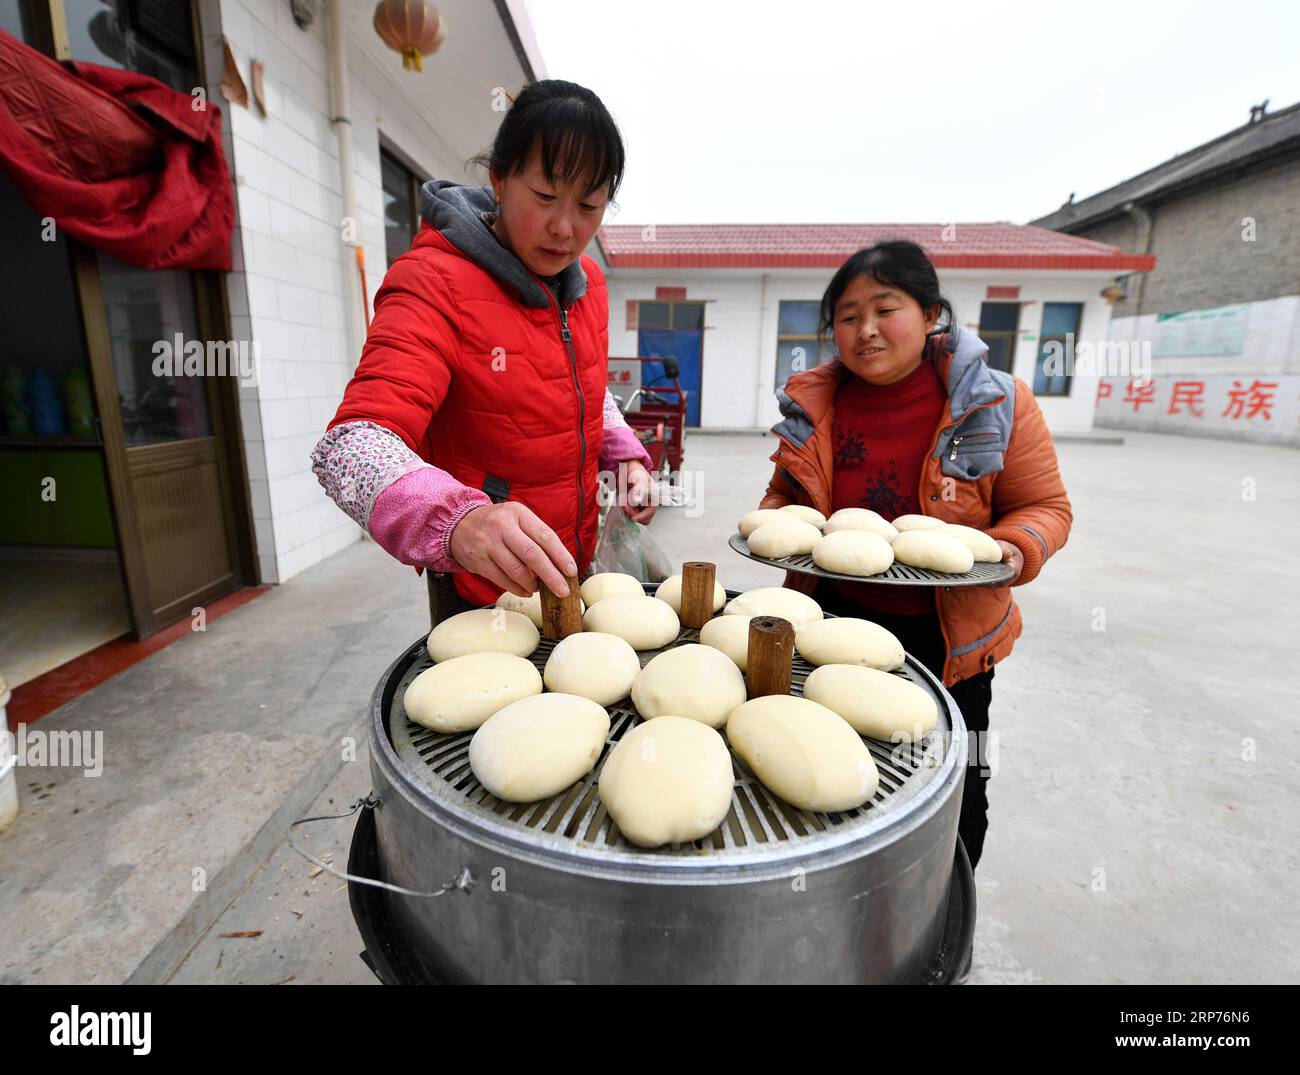 (190129) -- WENXI COUNTY, Jan. 29, 2019 (Xinhua) -- Residents of the Home of Happiness poverty-alleviation settlement cook steamed bread in Zhangcailing Village of Yangyu Township, Wenxi County, north China s Shanxi Province, Jan. 25, 2019. For generations, residents of Zhangcailing Village barely scraped a living as a result of geographical isolation, poor infrastructure and lack of supporting industries. To help pull villagers out of poverty, the government increased its financial support encouraging agriculture and husbandry suited to the local conditions. By planting Sichuan pepper, a spic Stock Photo